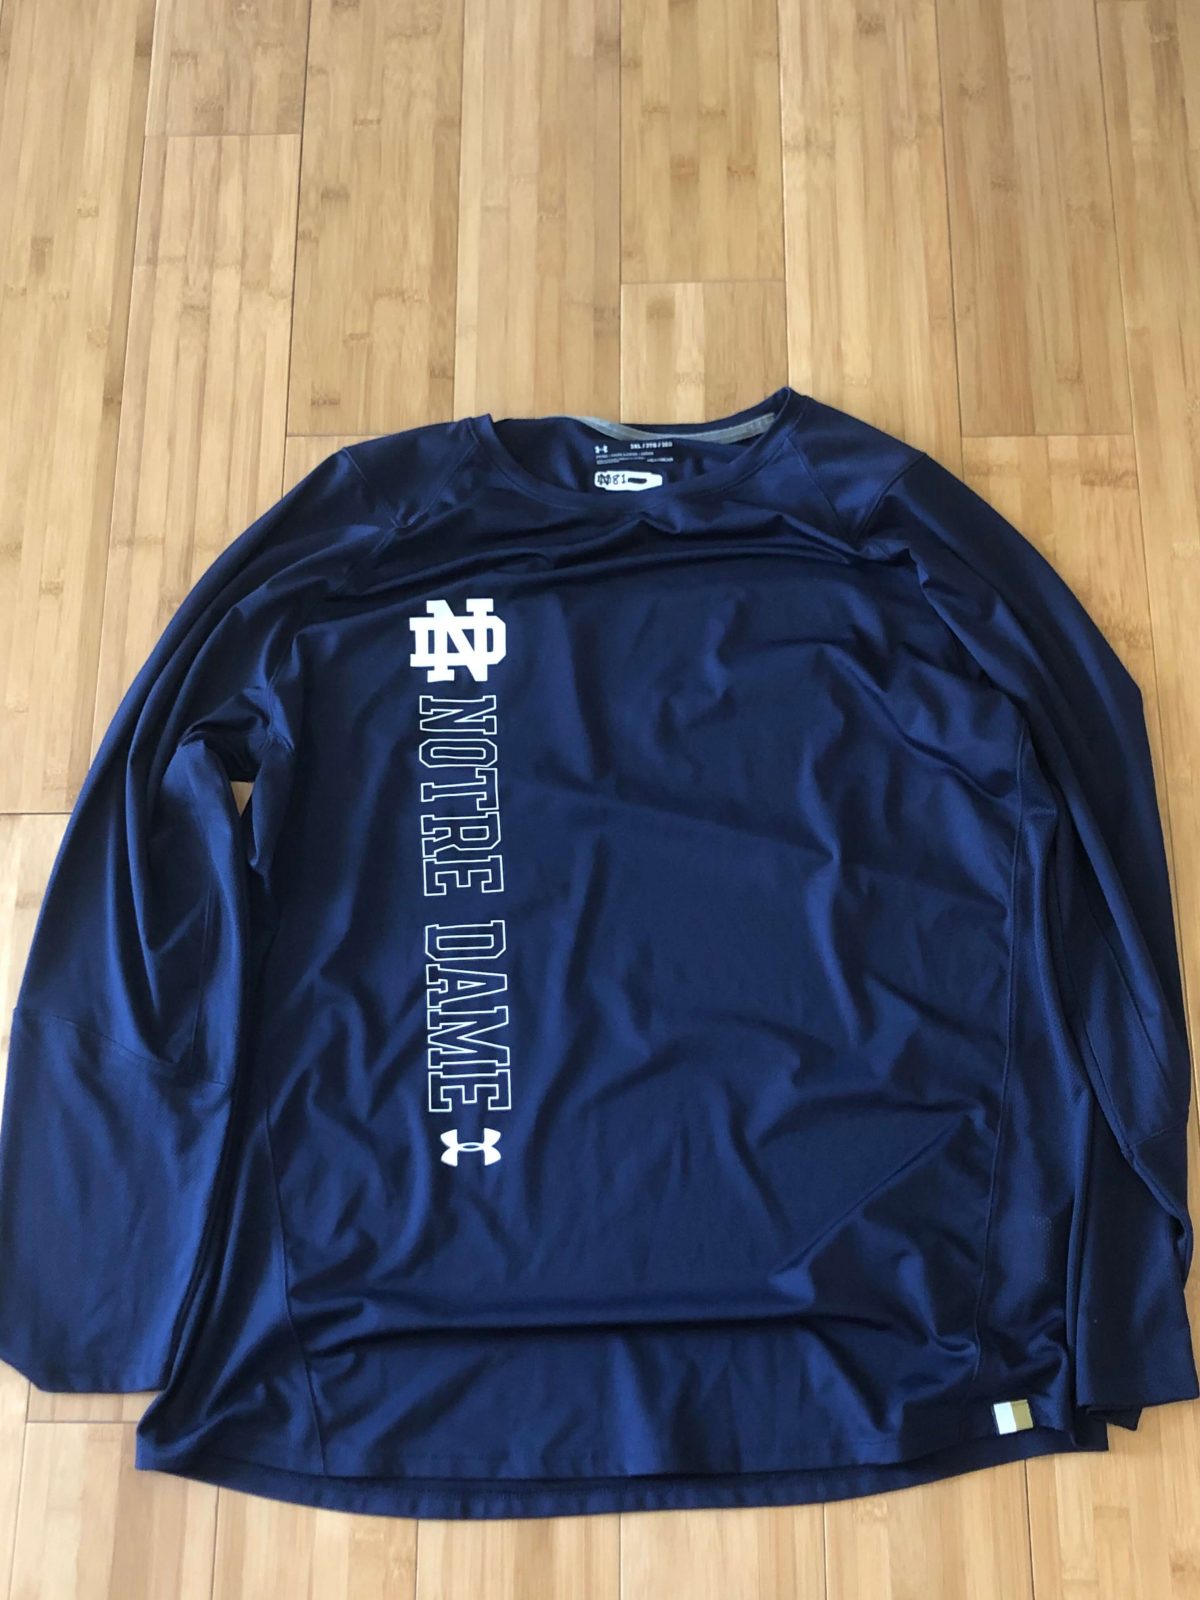 John Lager Notre Dame Football Under Armour Long Sleeve : NARP Clothing